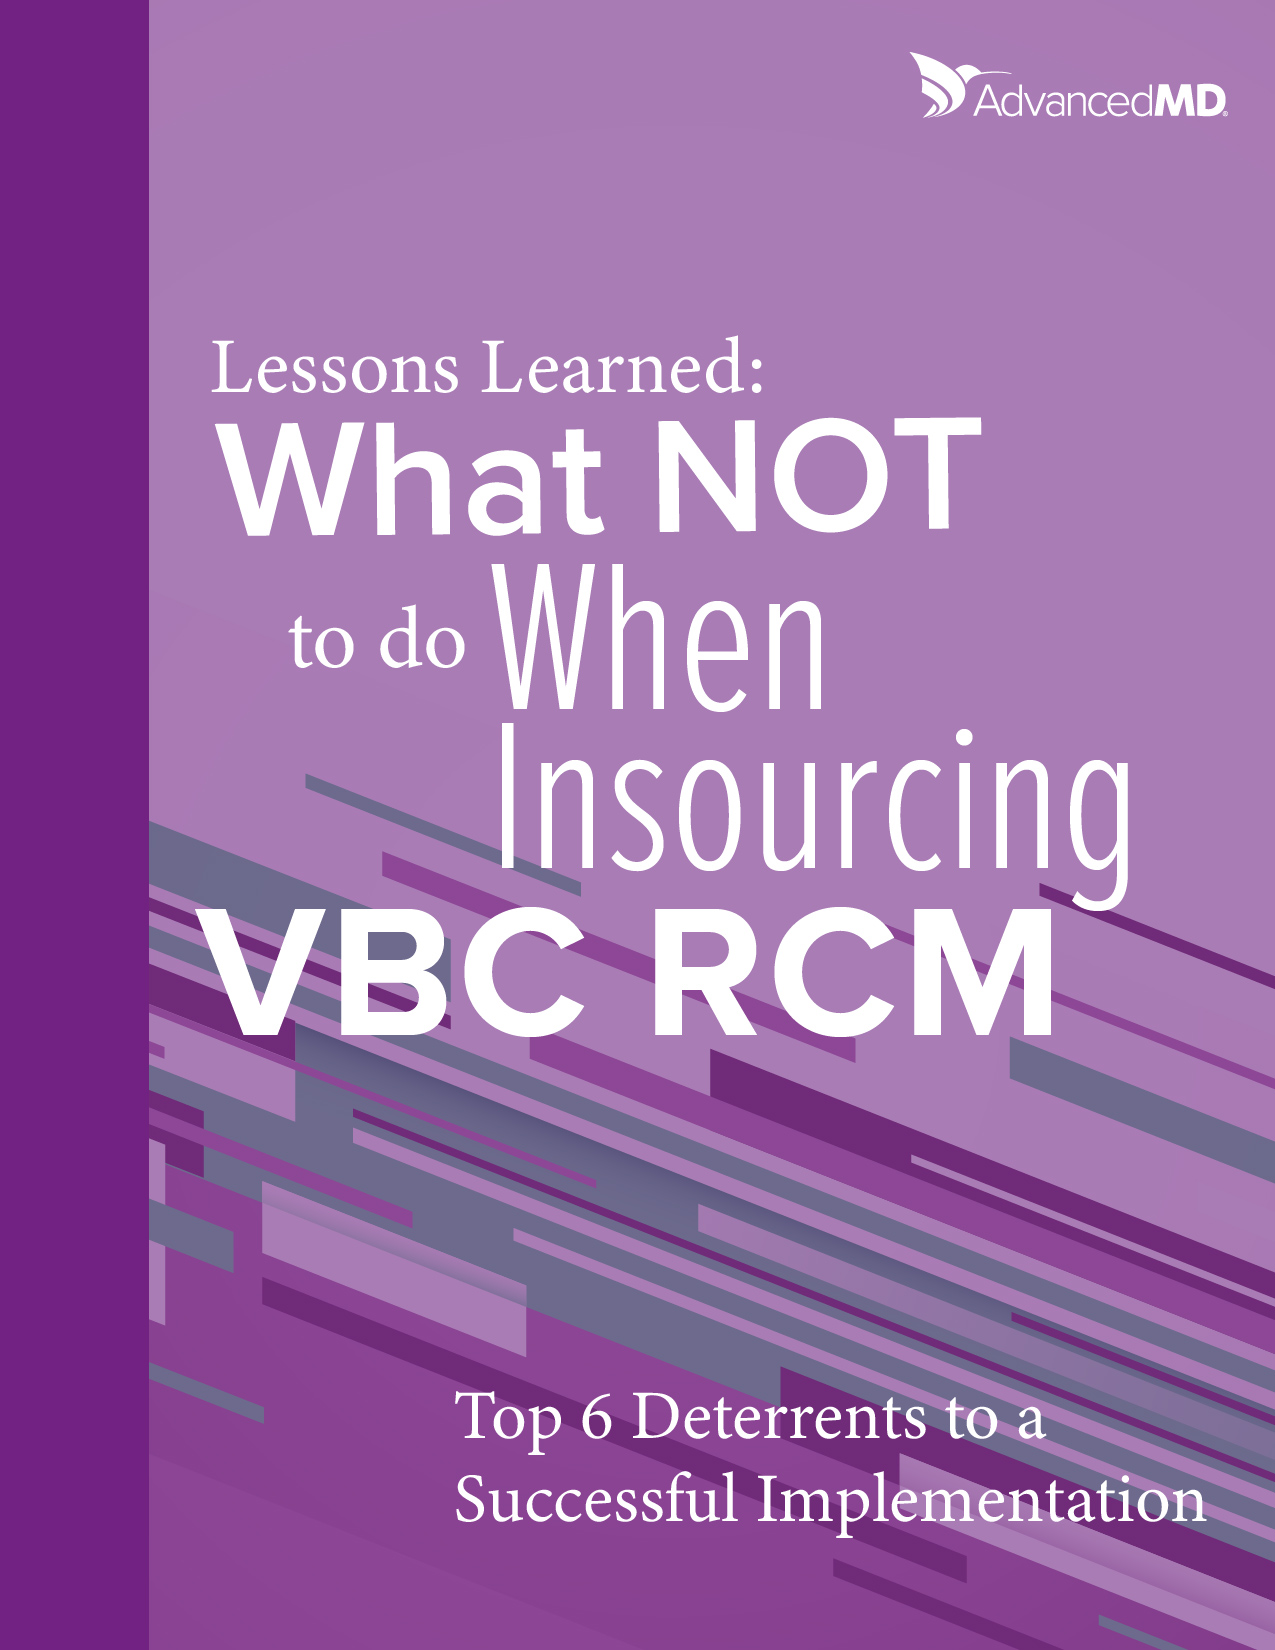 What NOT to do When Insourcing VBC RCM | AdvancedMD